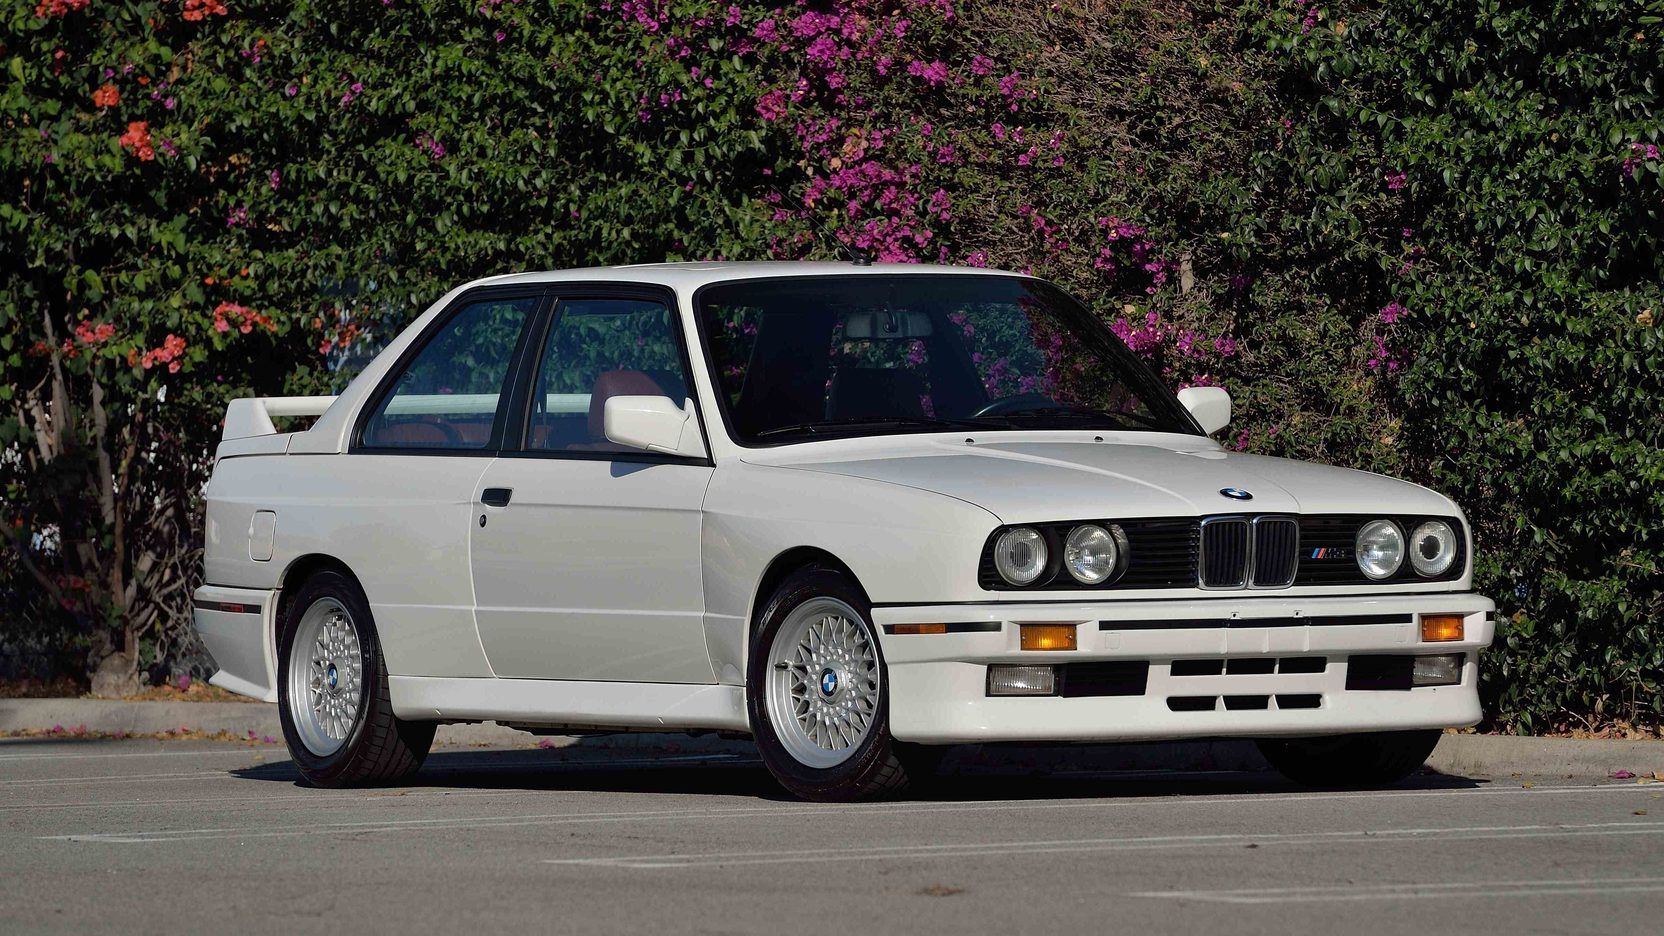 This E36 BMW M3 Lightweight is Going to Cost Big Bucks